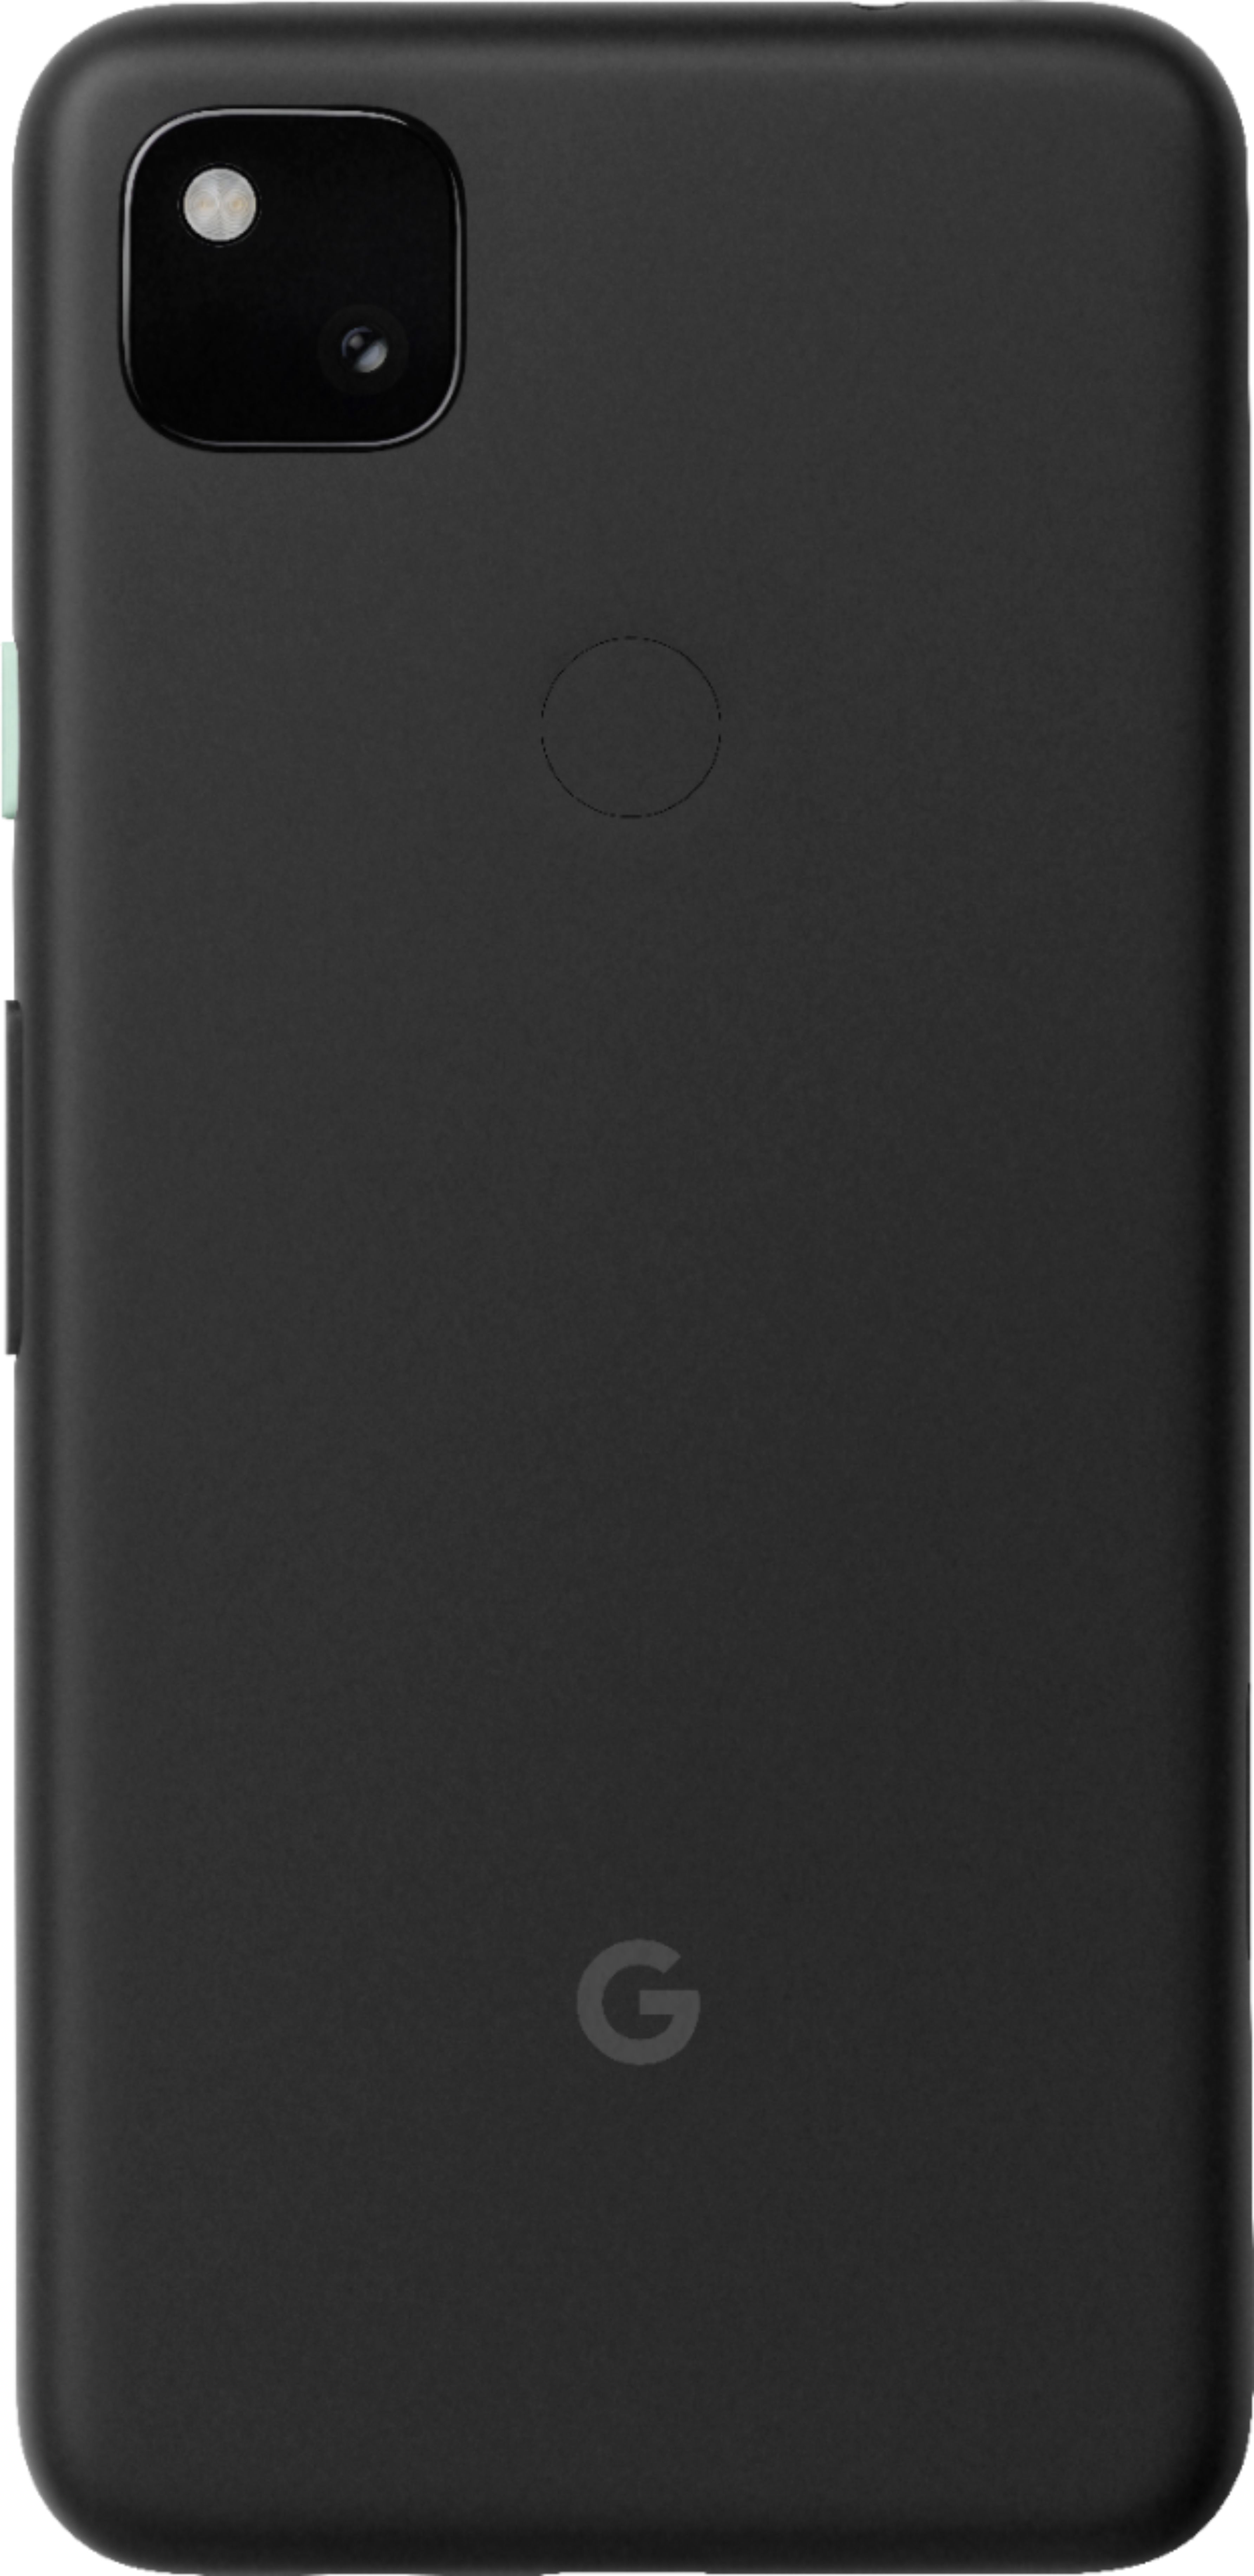 Questions and Answers: Google Pixel 4a 128GB (Unlocked) Just Black ...